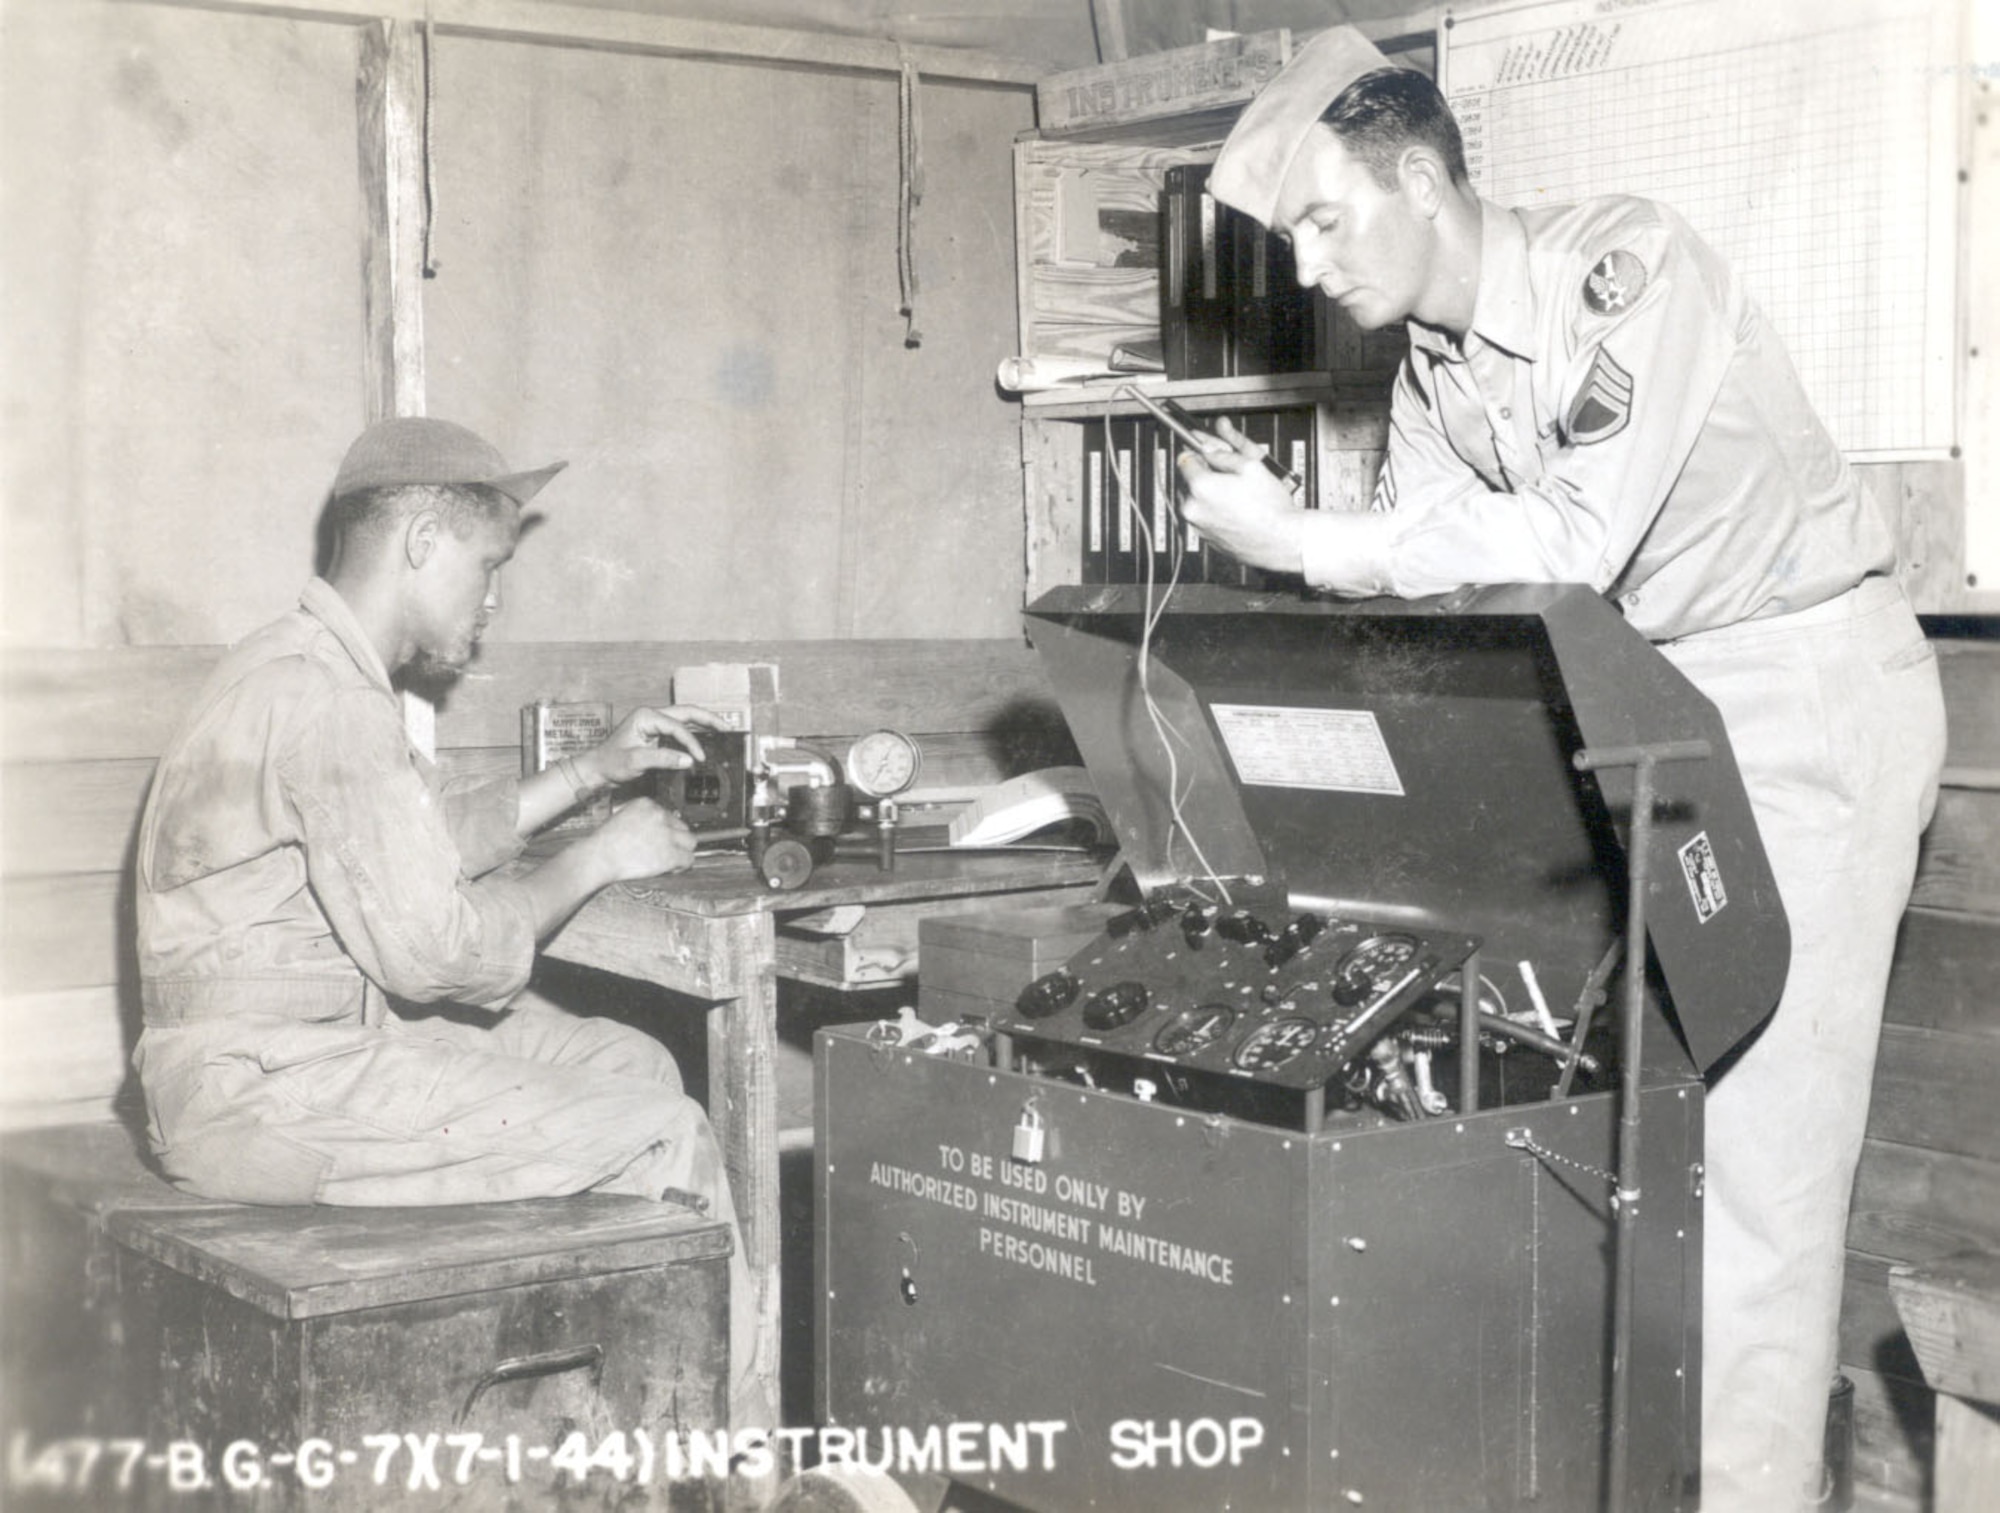 A member of the 447th Bombardment Group (Medium) receives on-the-job training of aircraft instrumentation at Godman Field, Fort Knox, Kent., in July 1944. The 447th BG was assigned to First Air Force from April 10, 1944 to March 21, 1946.